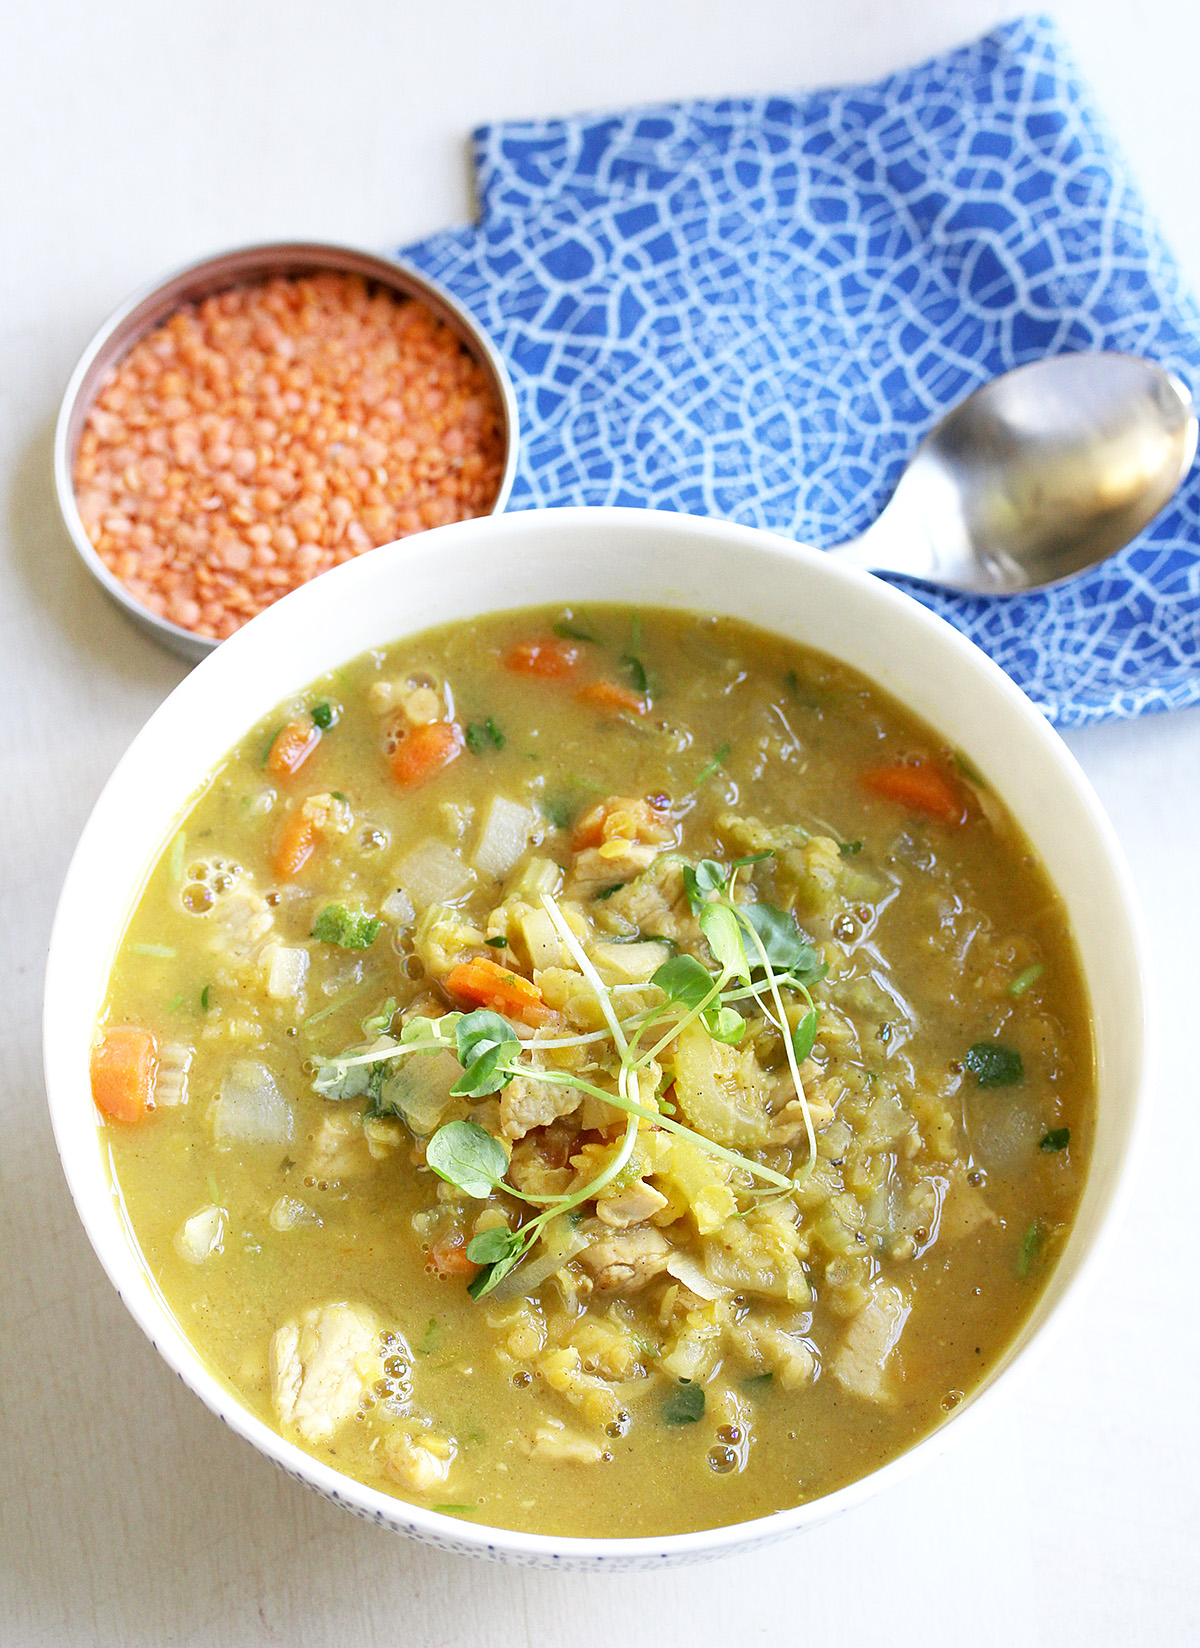 Recipe for low sodium chicken and red lentil stew